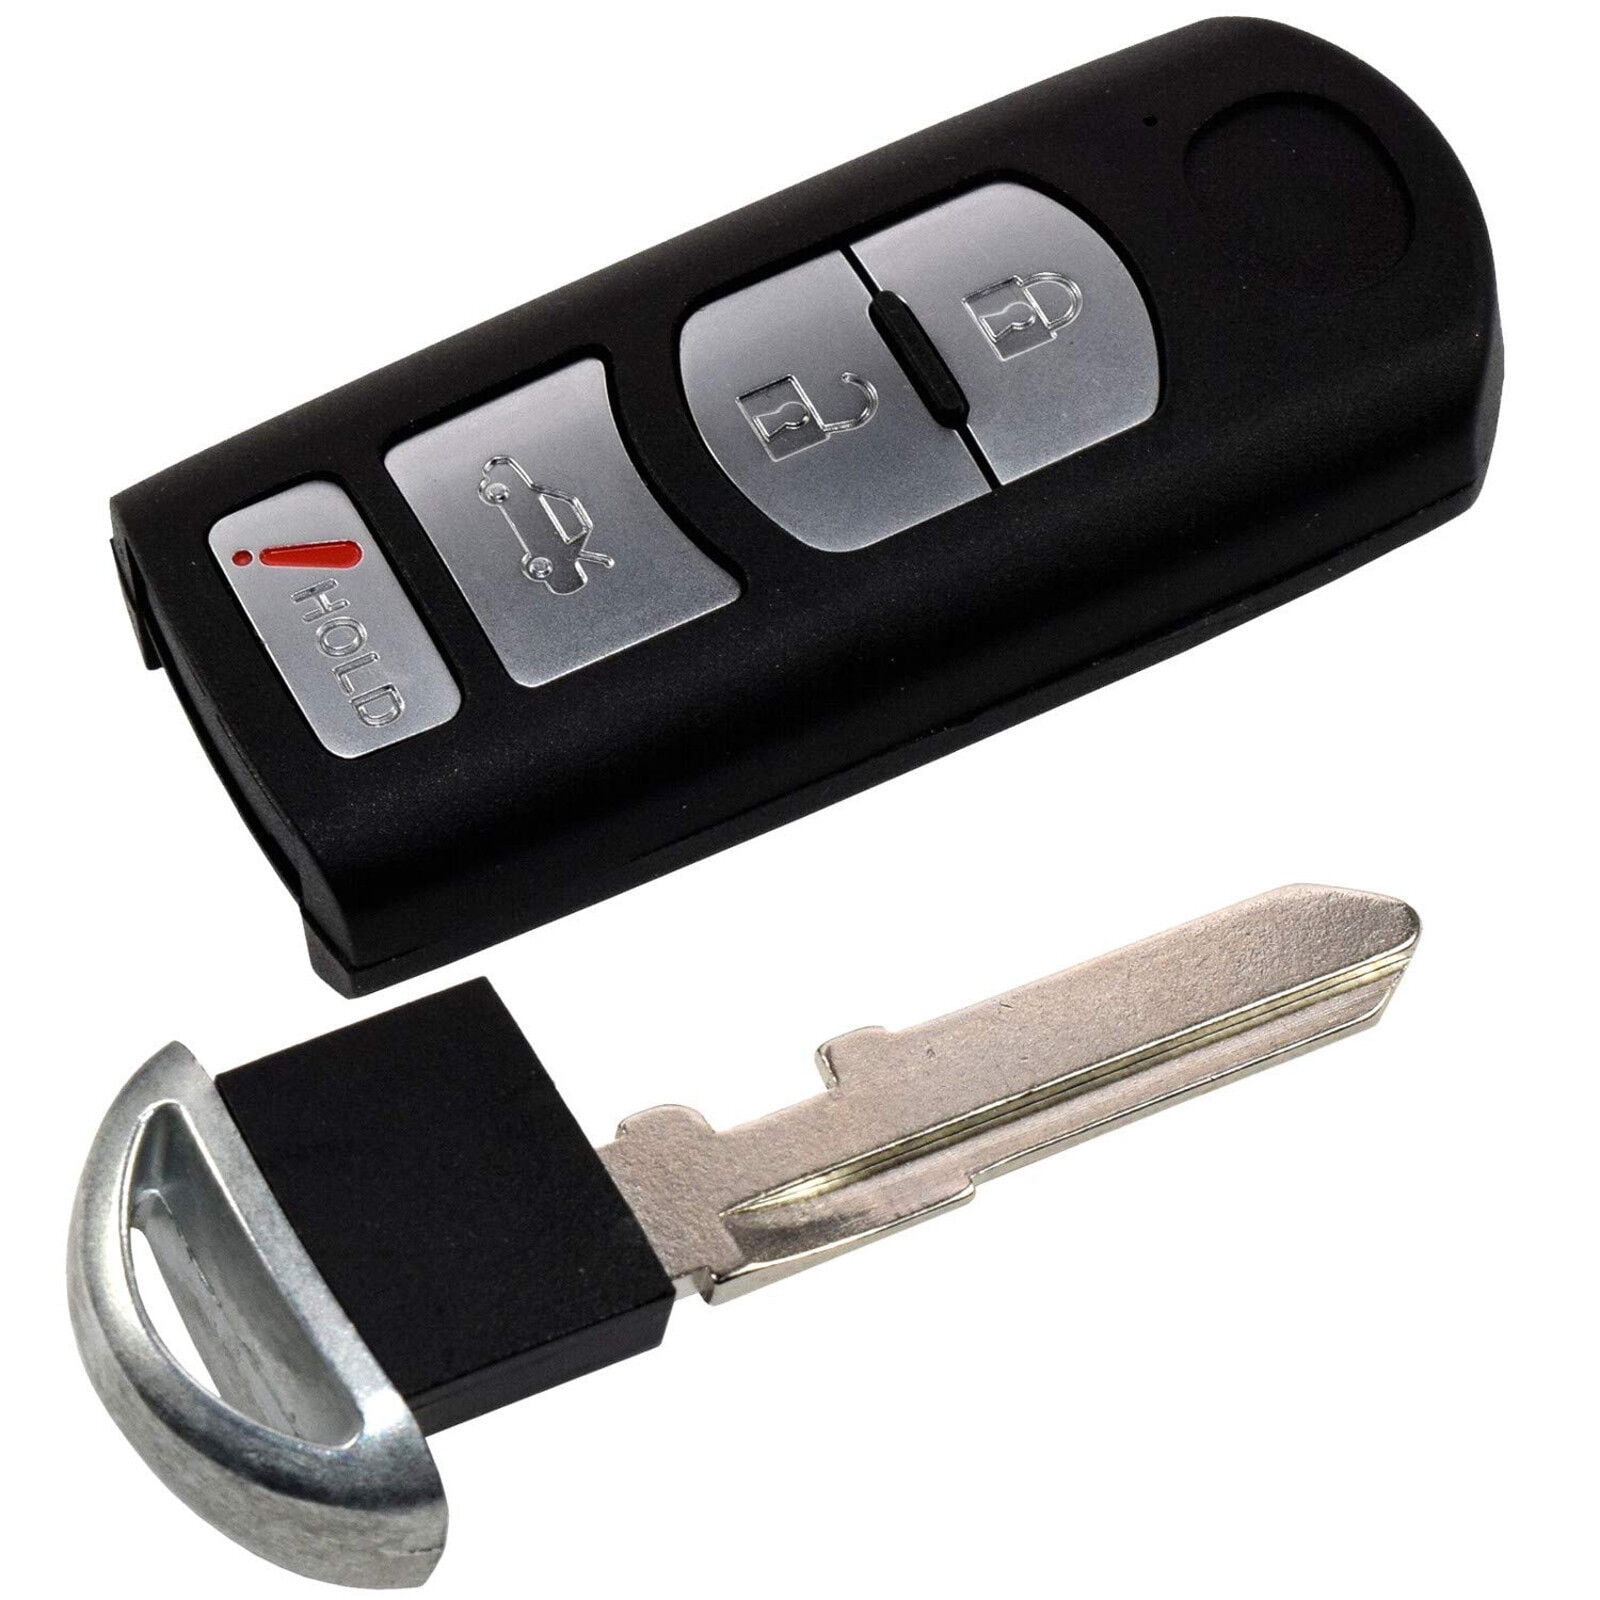 2/3/4 Buttons Smart Remote Car Key Shell Case Fob for Mazda 3 5 6 CX-5 CX-7  CX-9 with Emergency Key - AliExpress